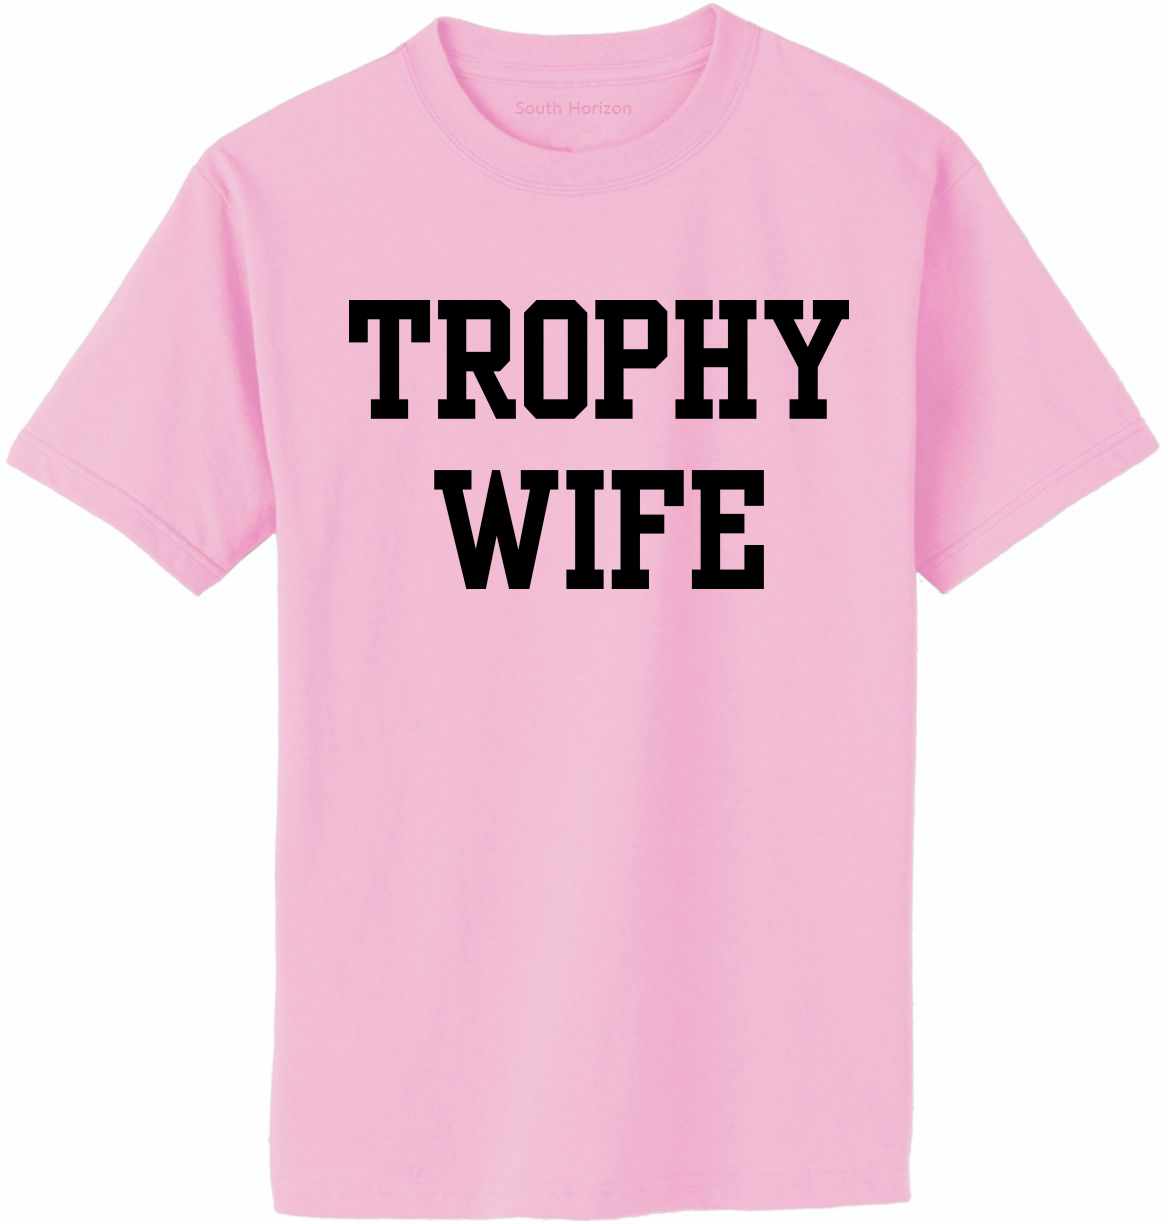 Trophy Wife on Adult T-Shirt (#1308-1)